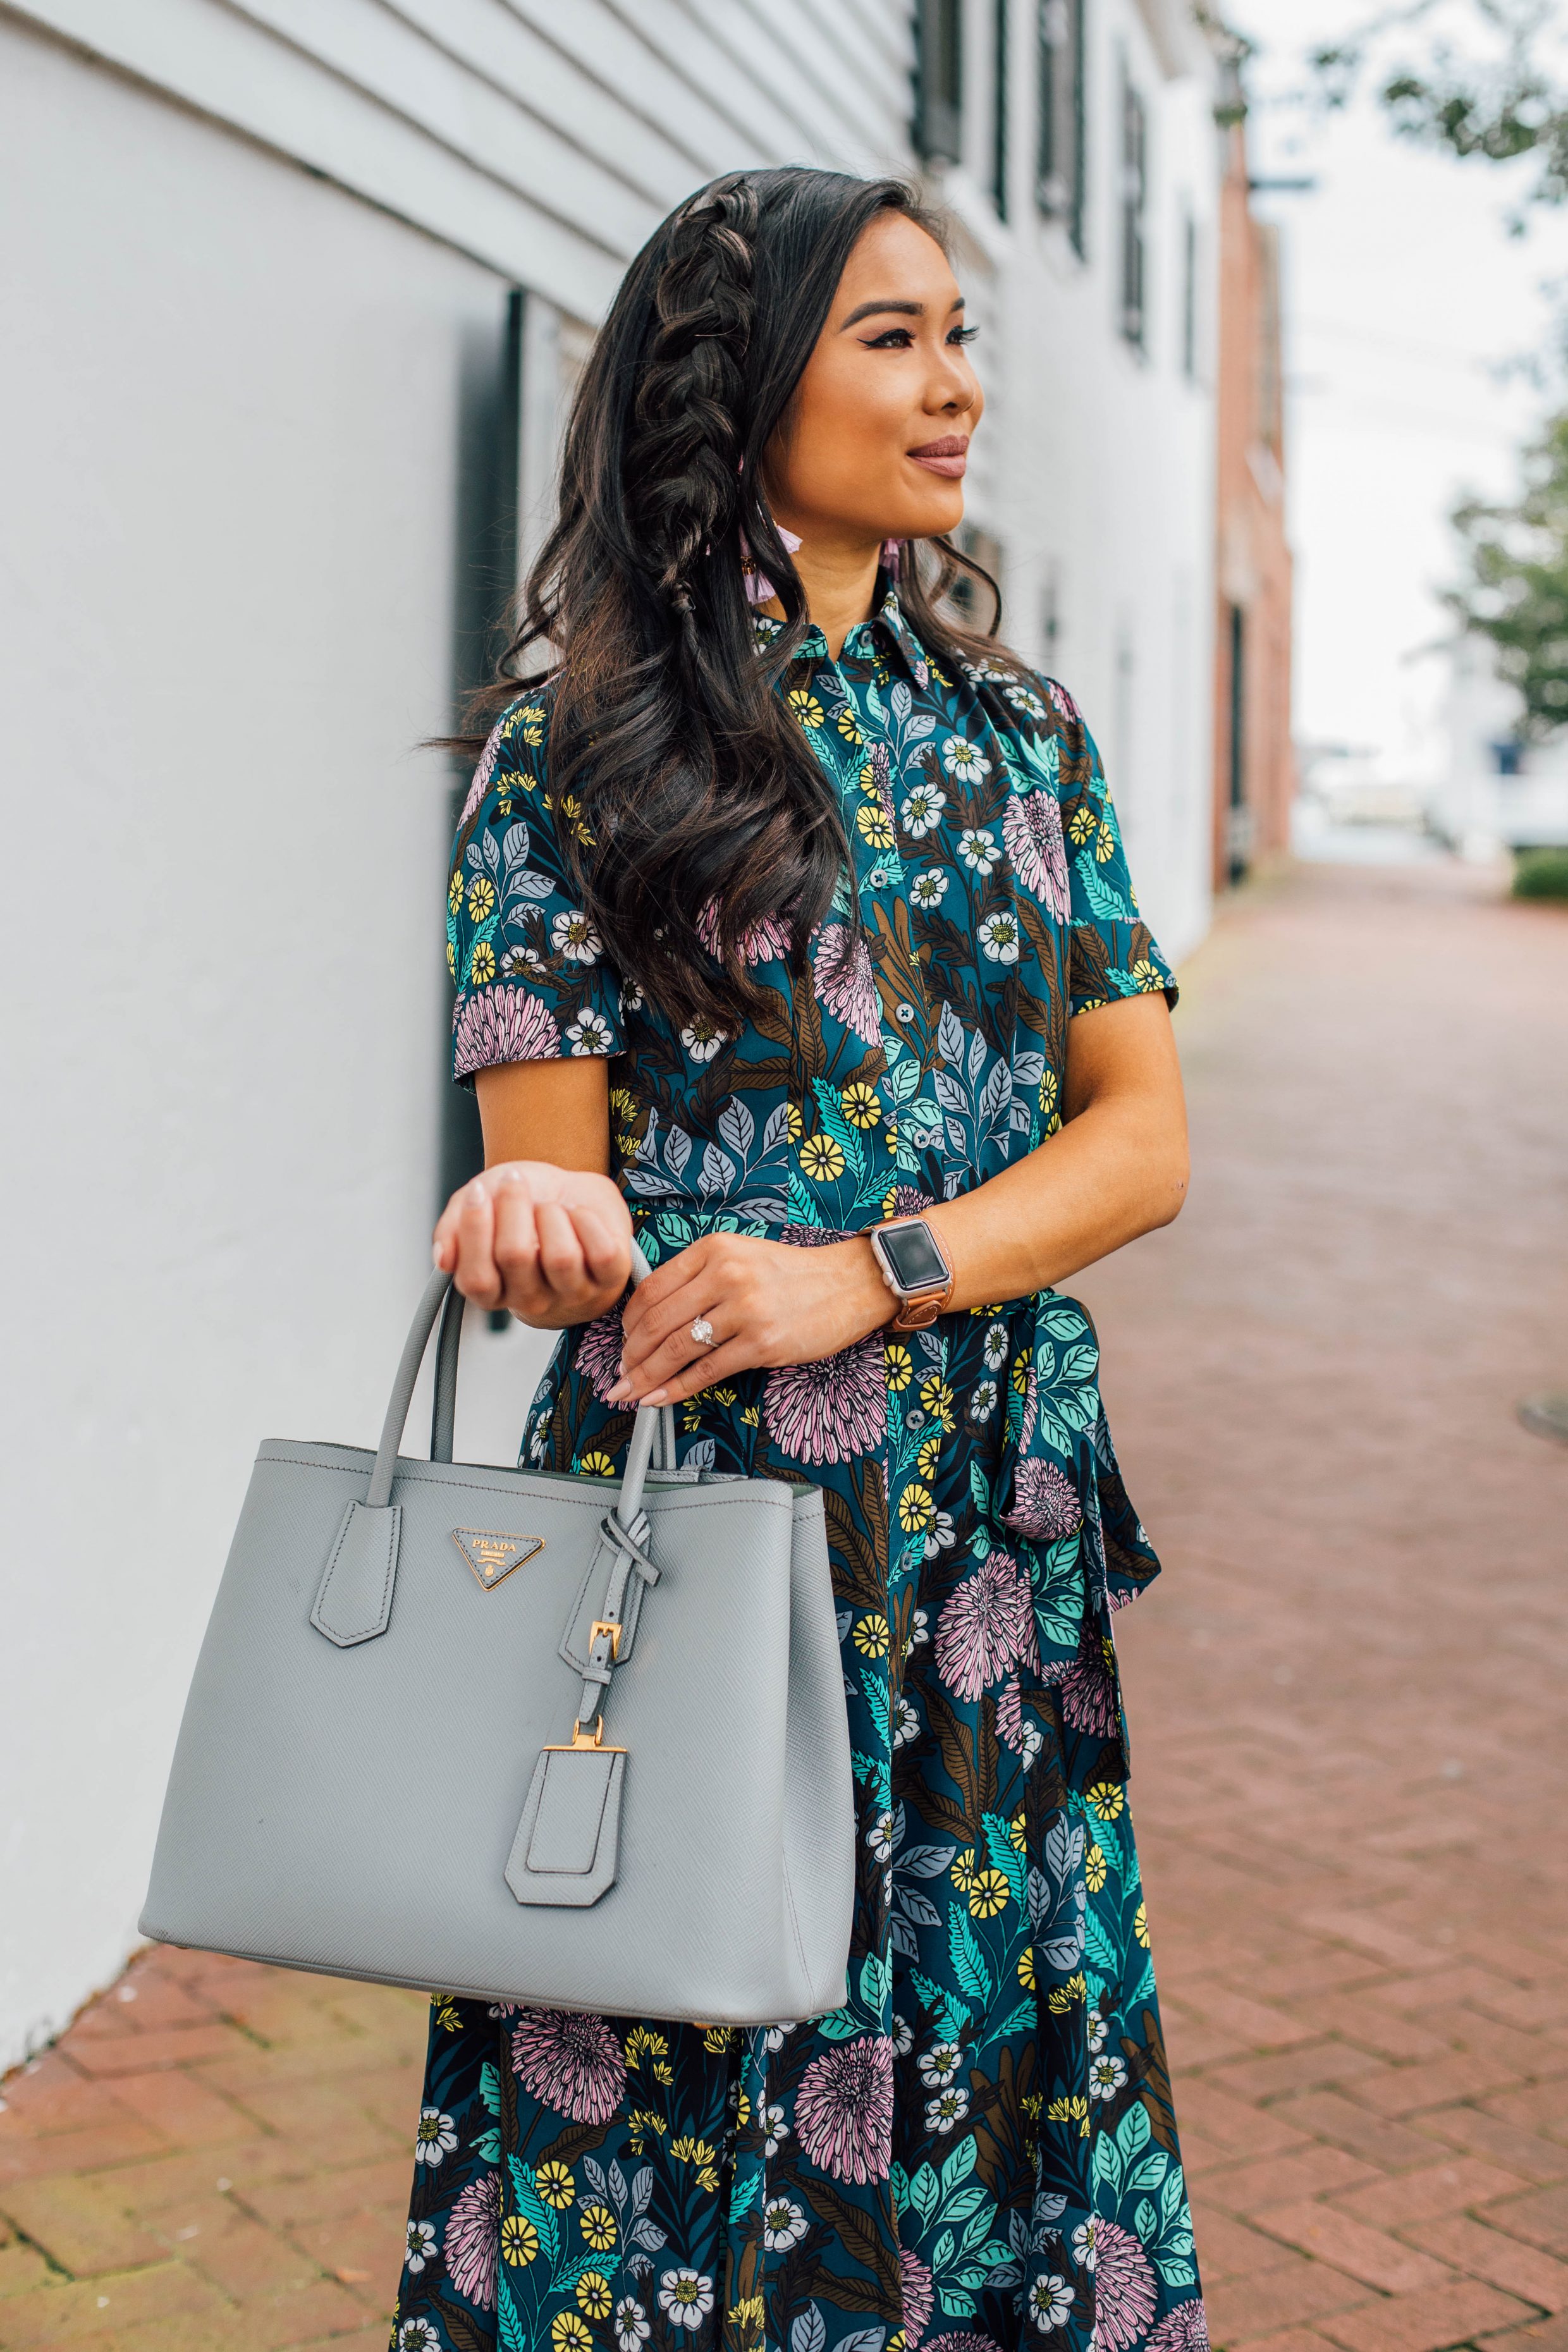 Transitional Outfits - the Floral Maxi Dress - kelseyybarnes